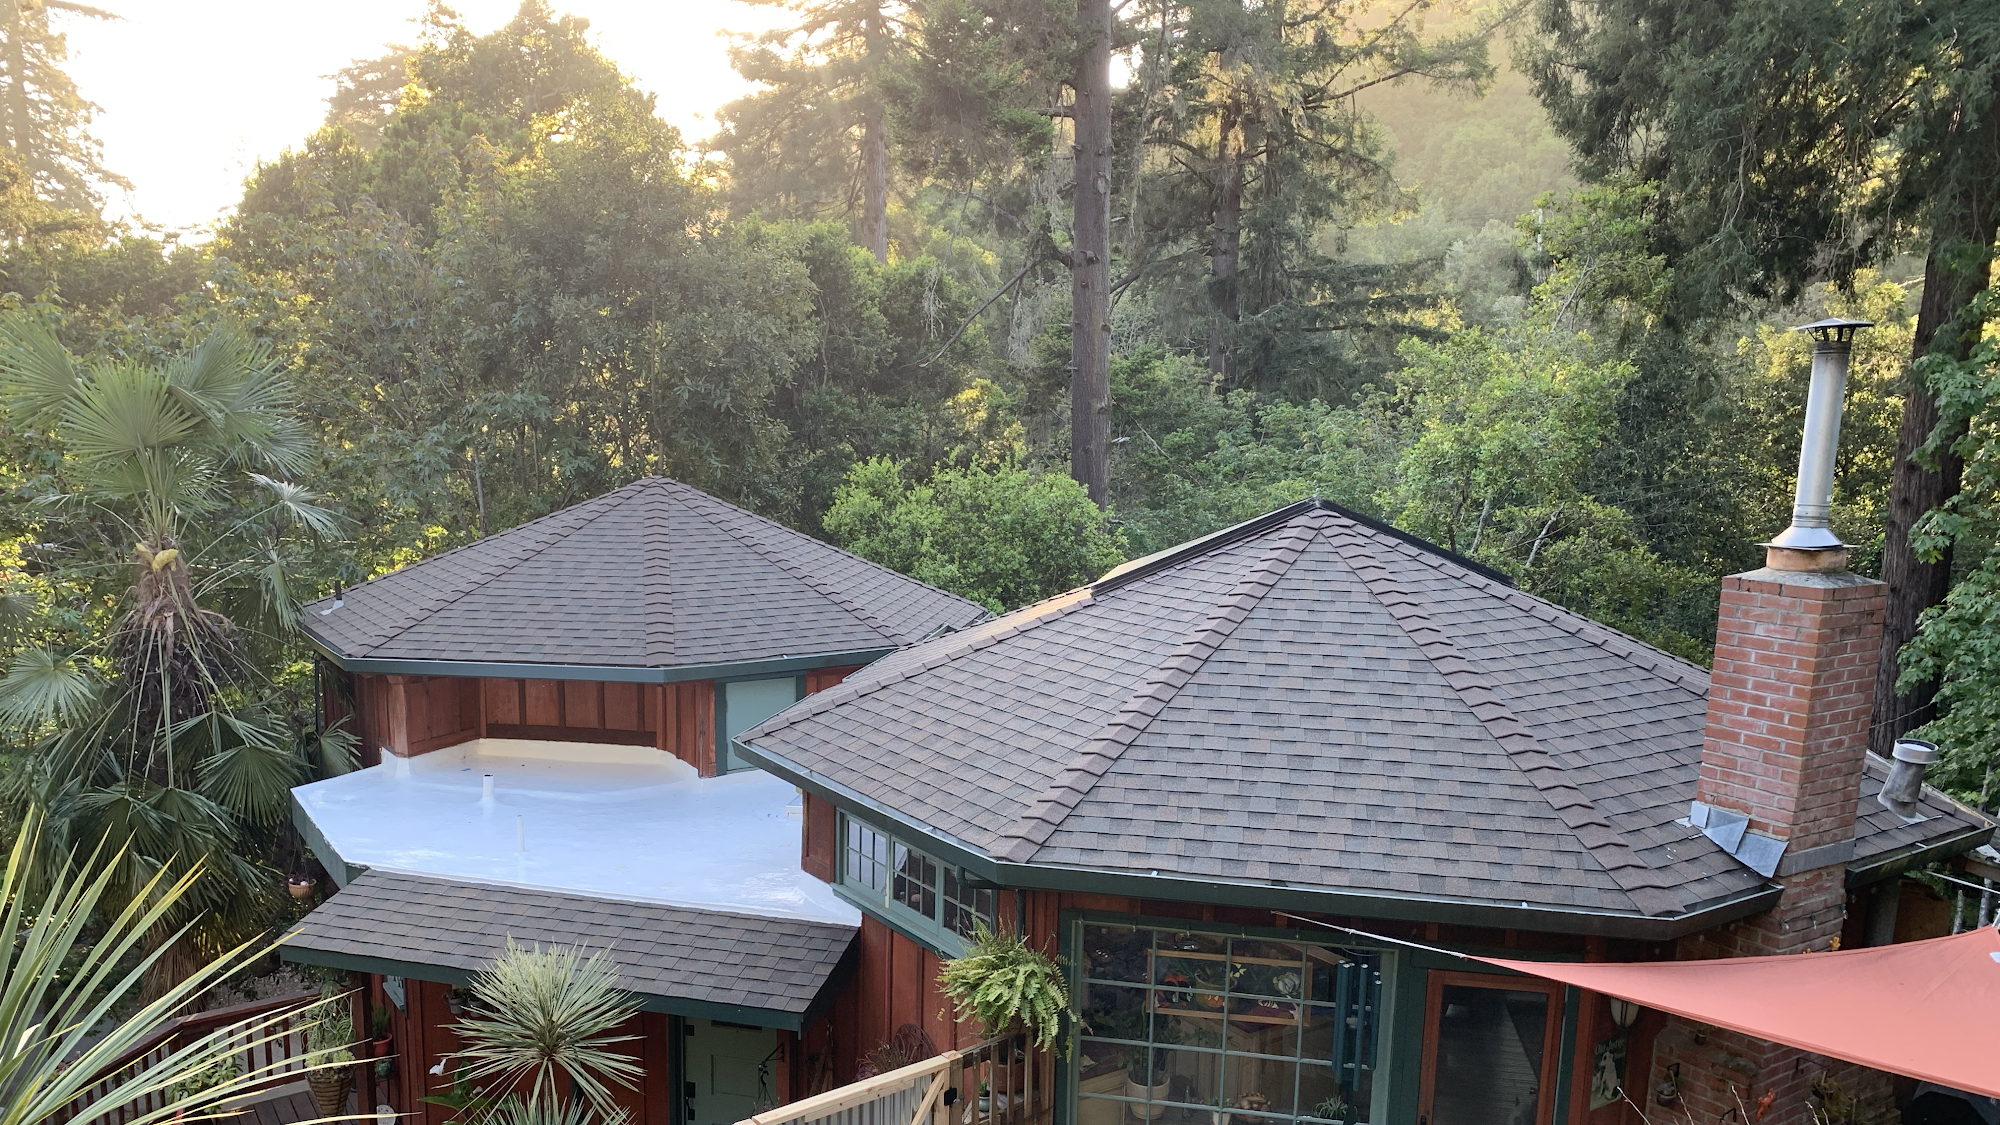 Redwood Roofing and Repair